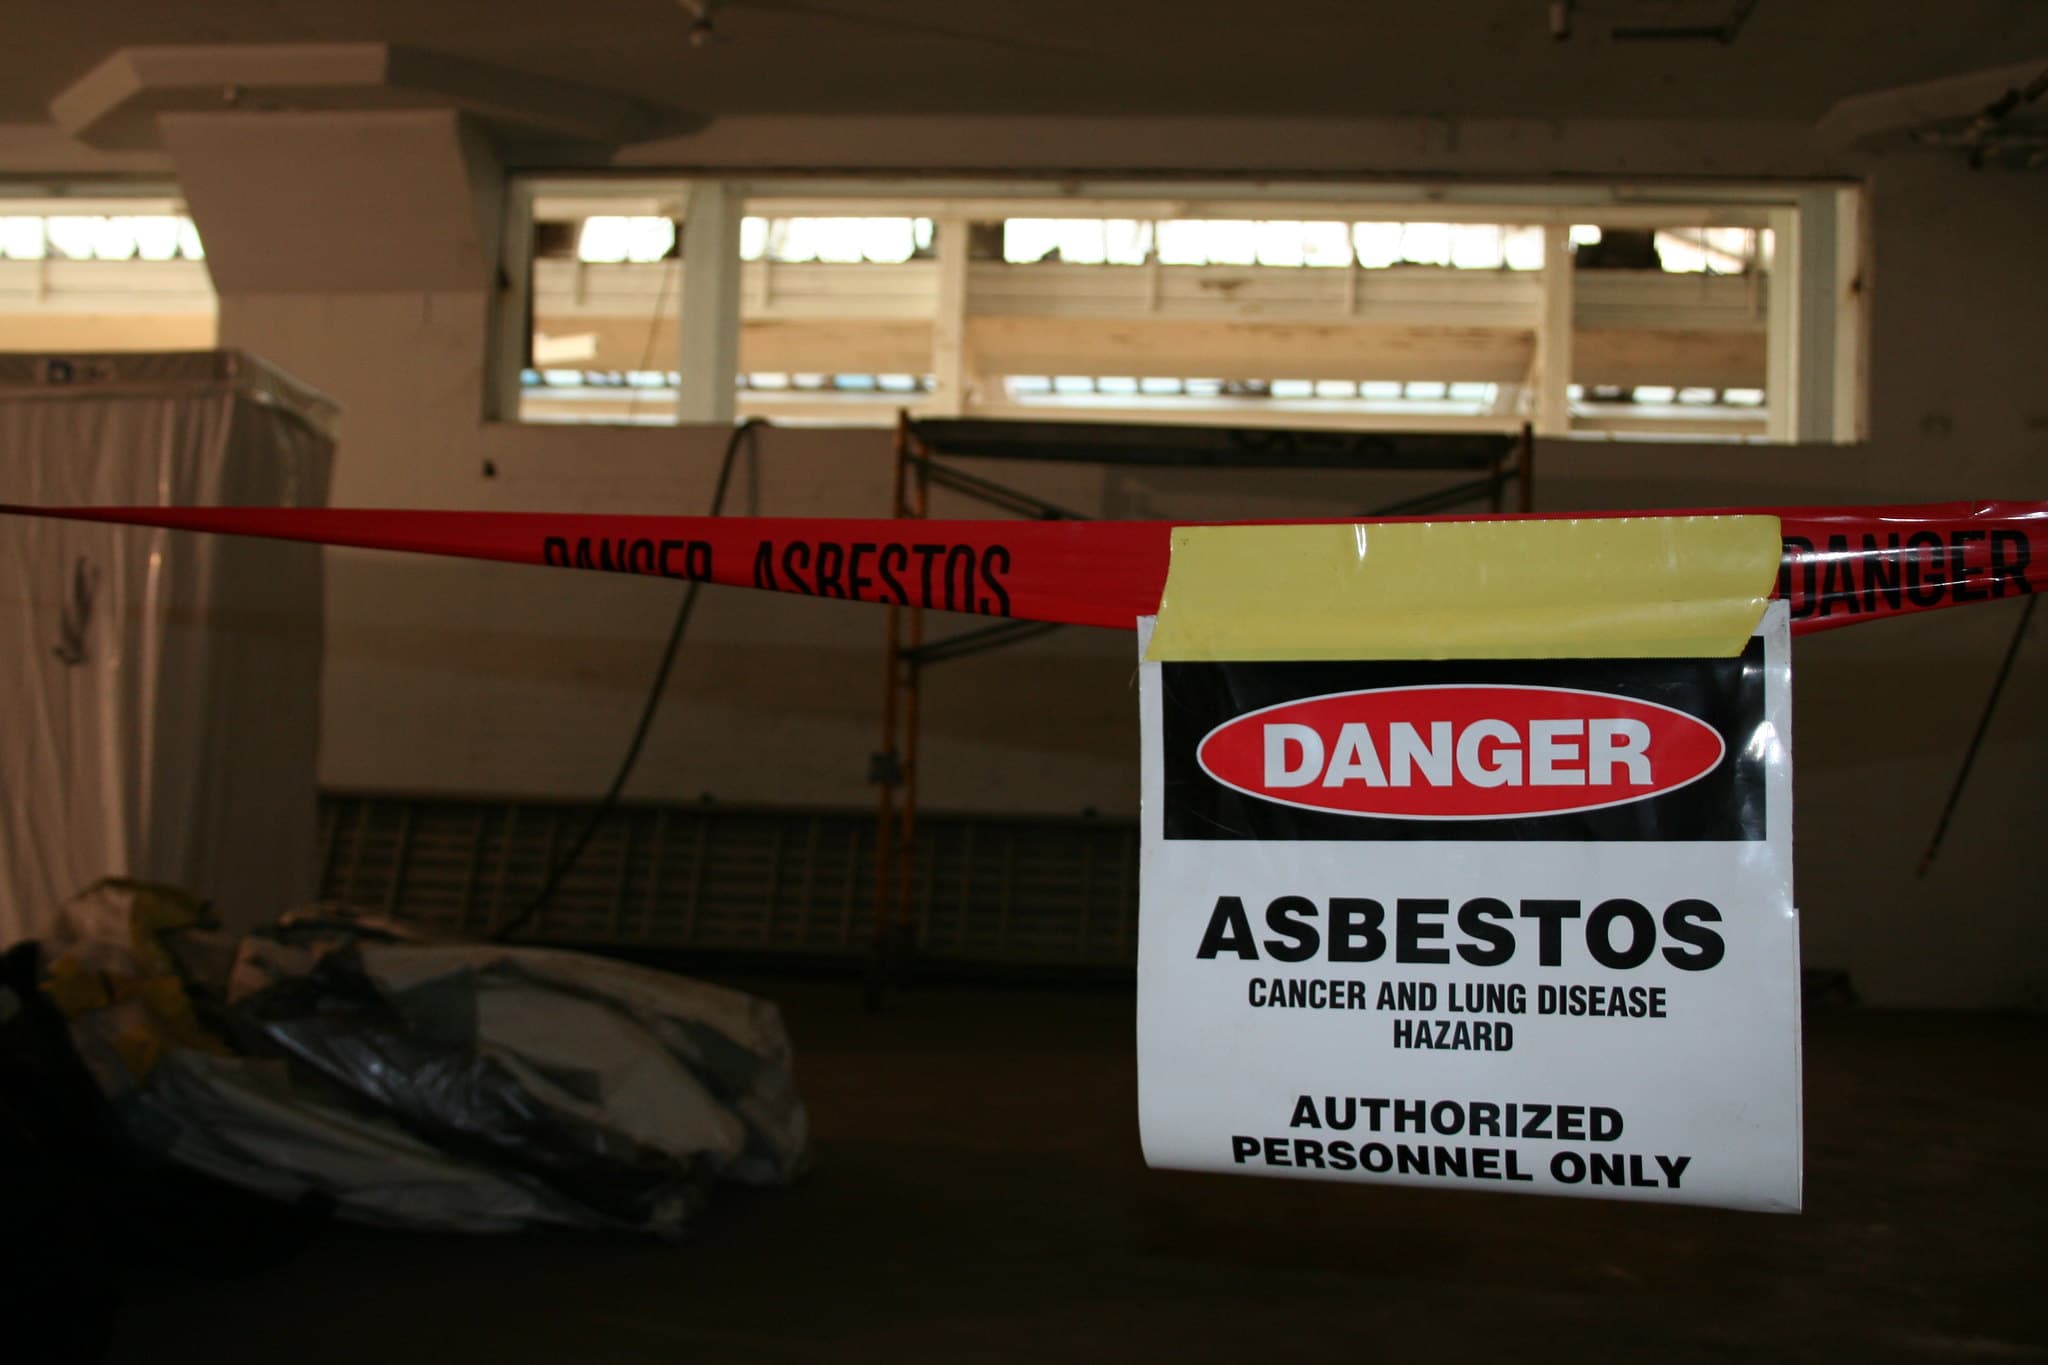 What You Need to Know About the Dangers of Asbestos